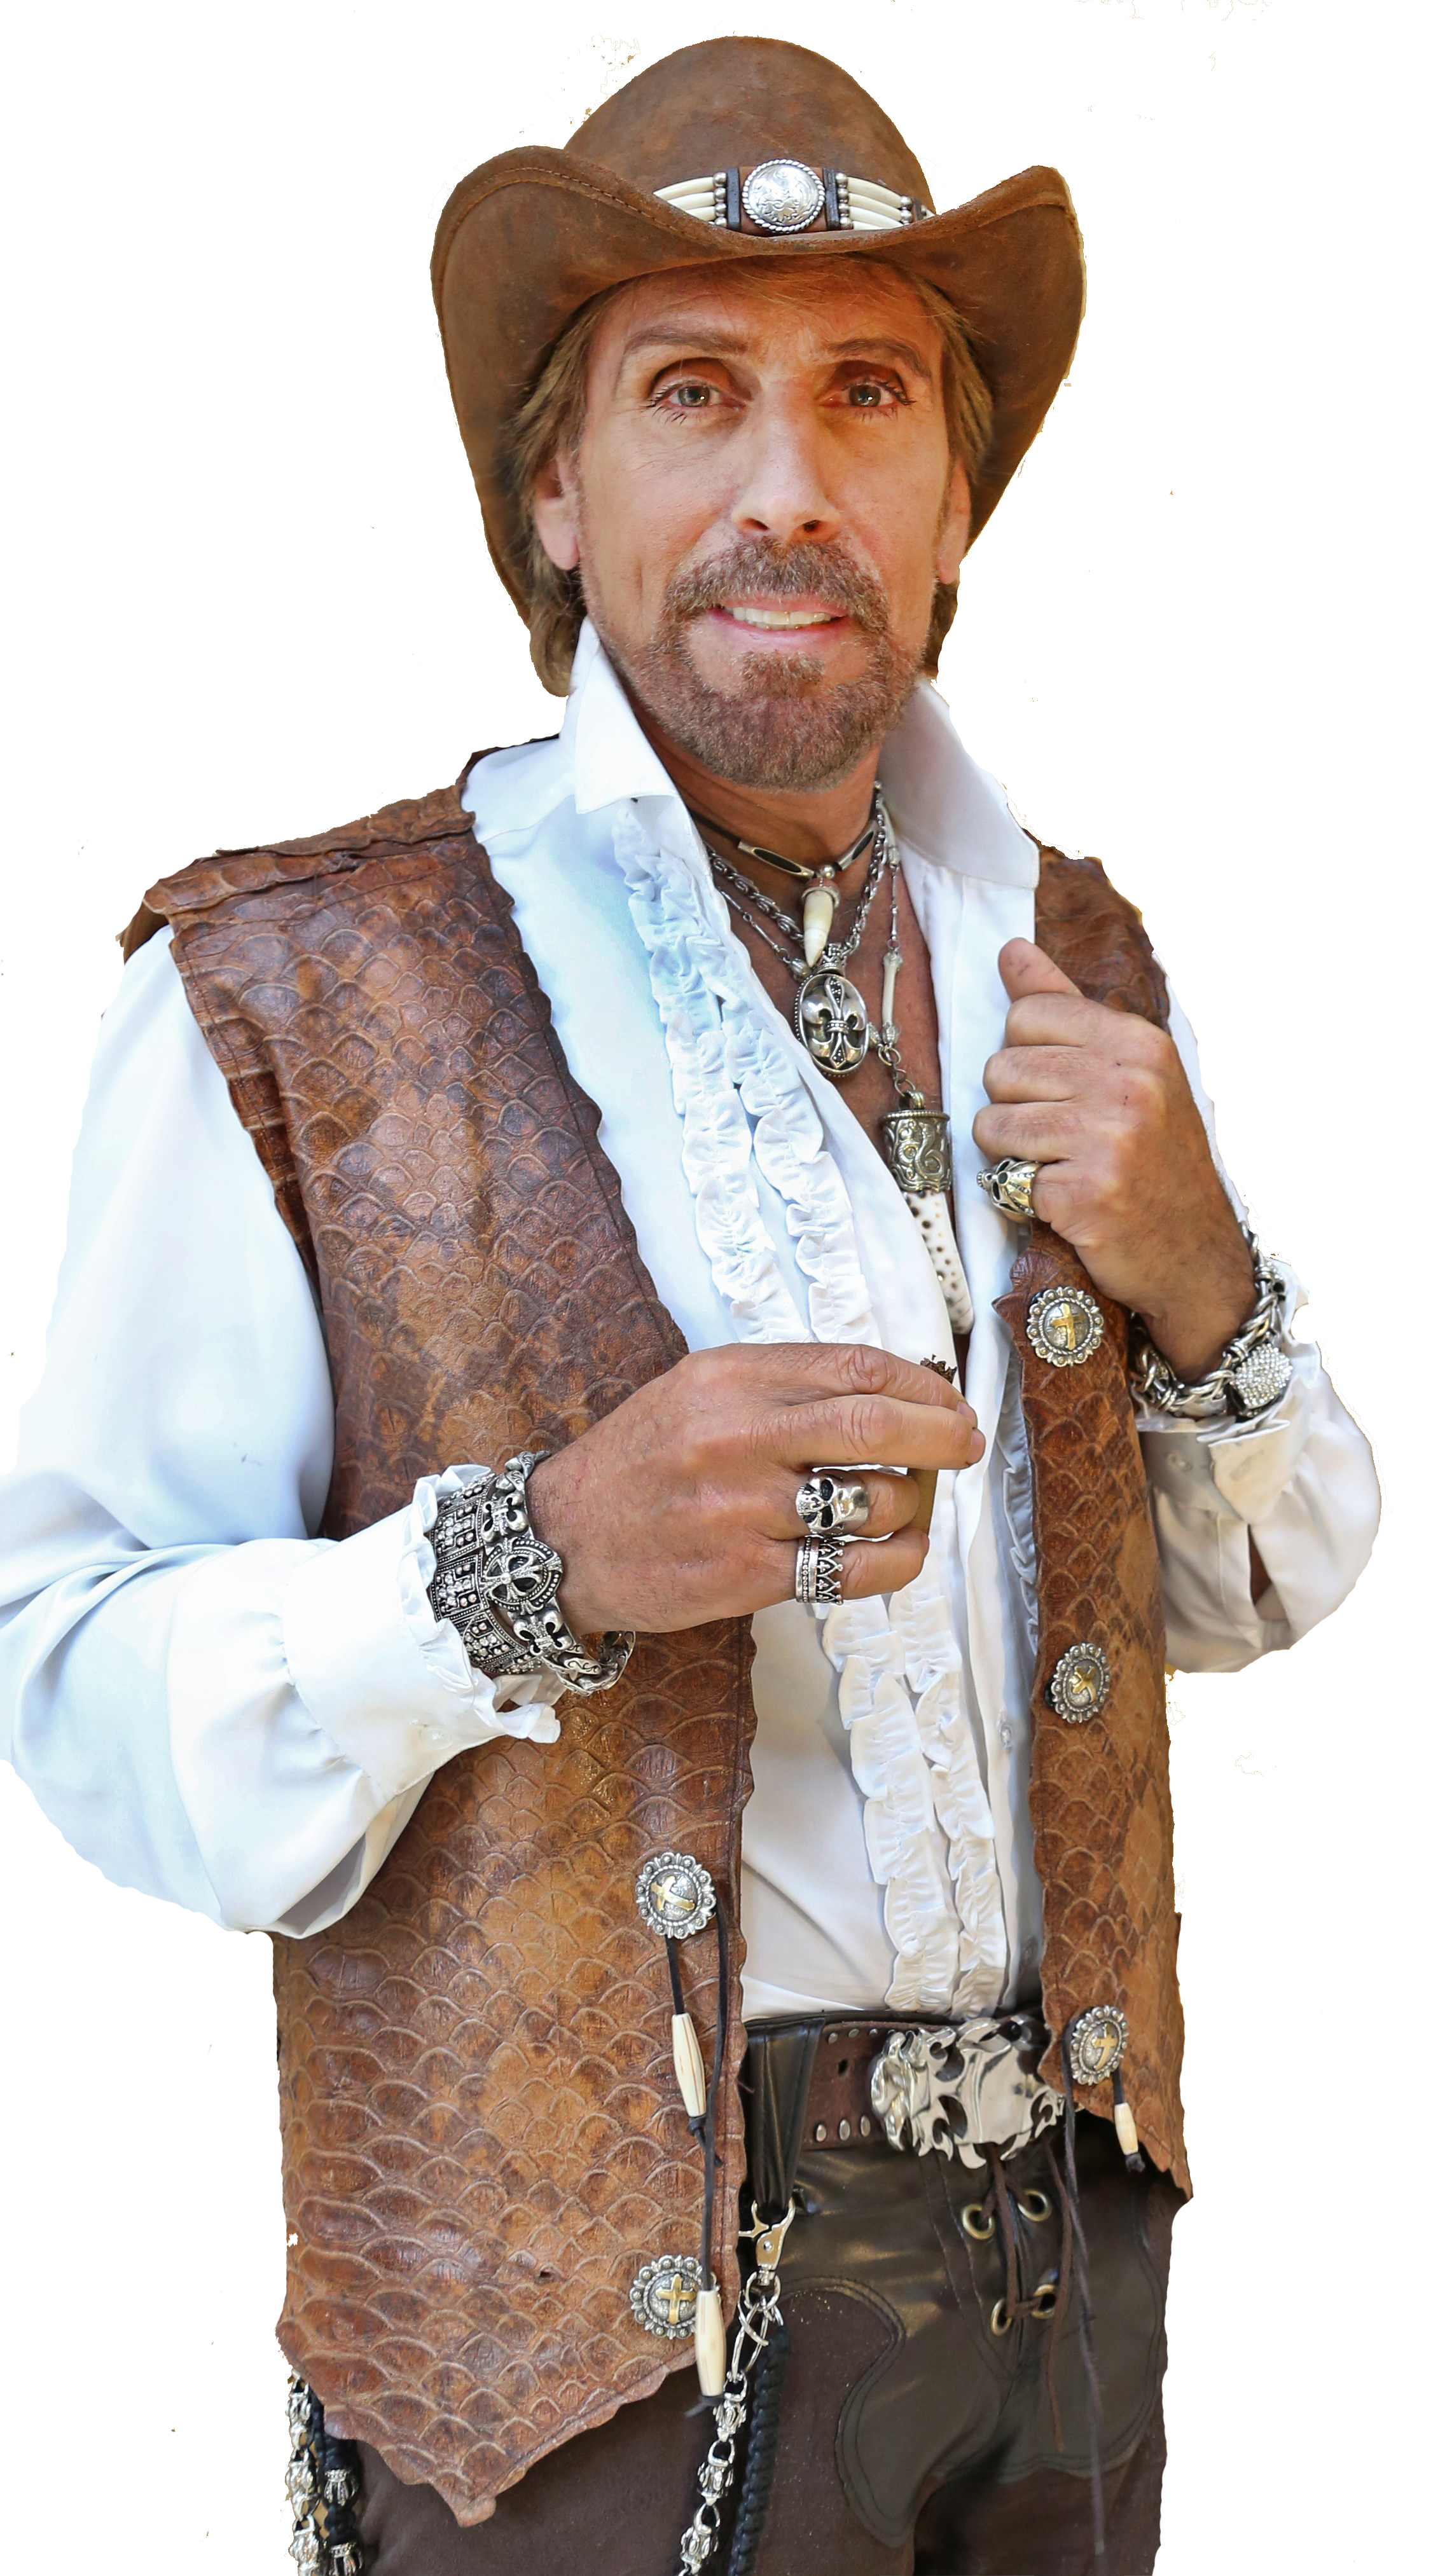 Richie Marcello the Treasure King in a new REELZ ORIGINAL REALITY Series Features the Outrageous Adventures of Collector Richie Marcello, Part Indiana Jones, Part James Bond as He Travels the World to Find Treasures Many Considered Lost Forever